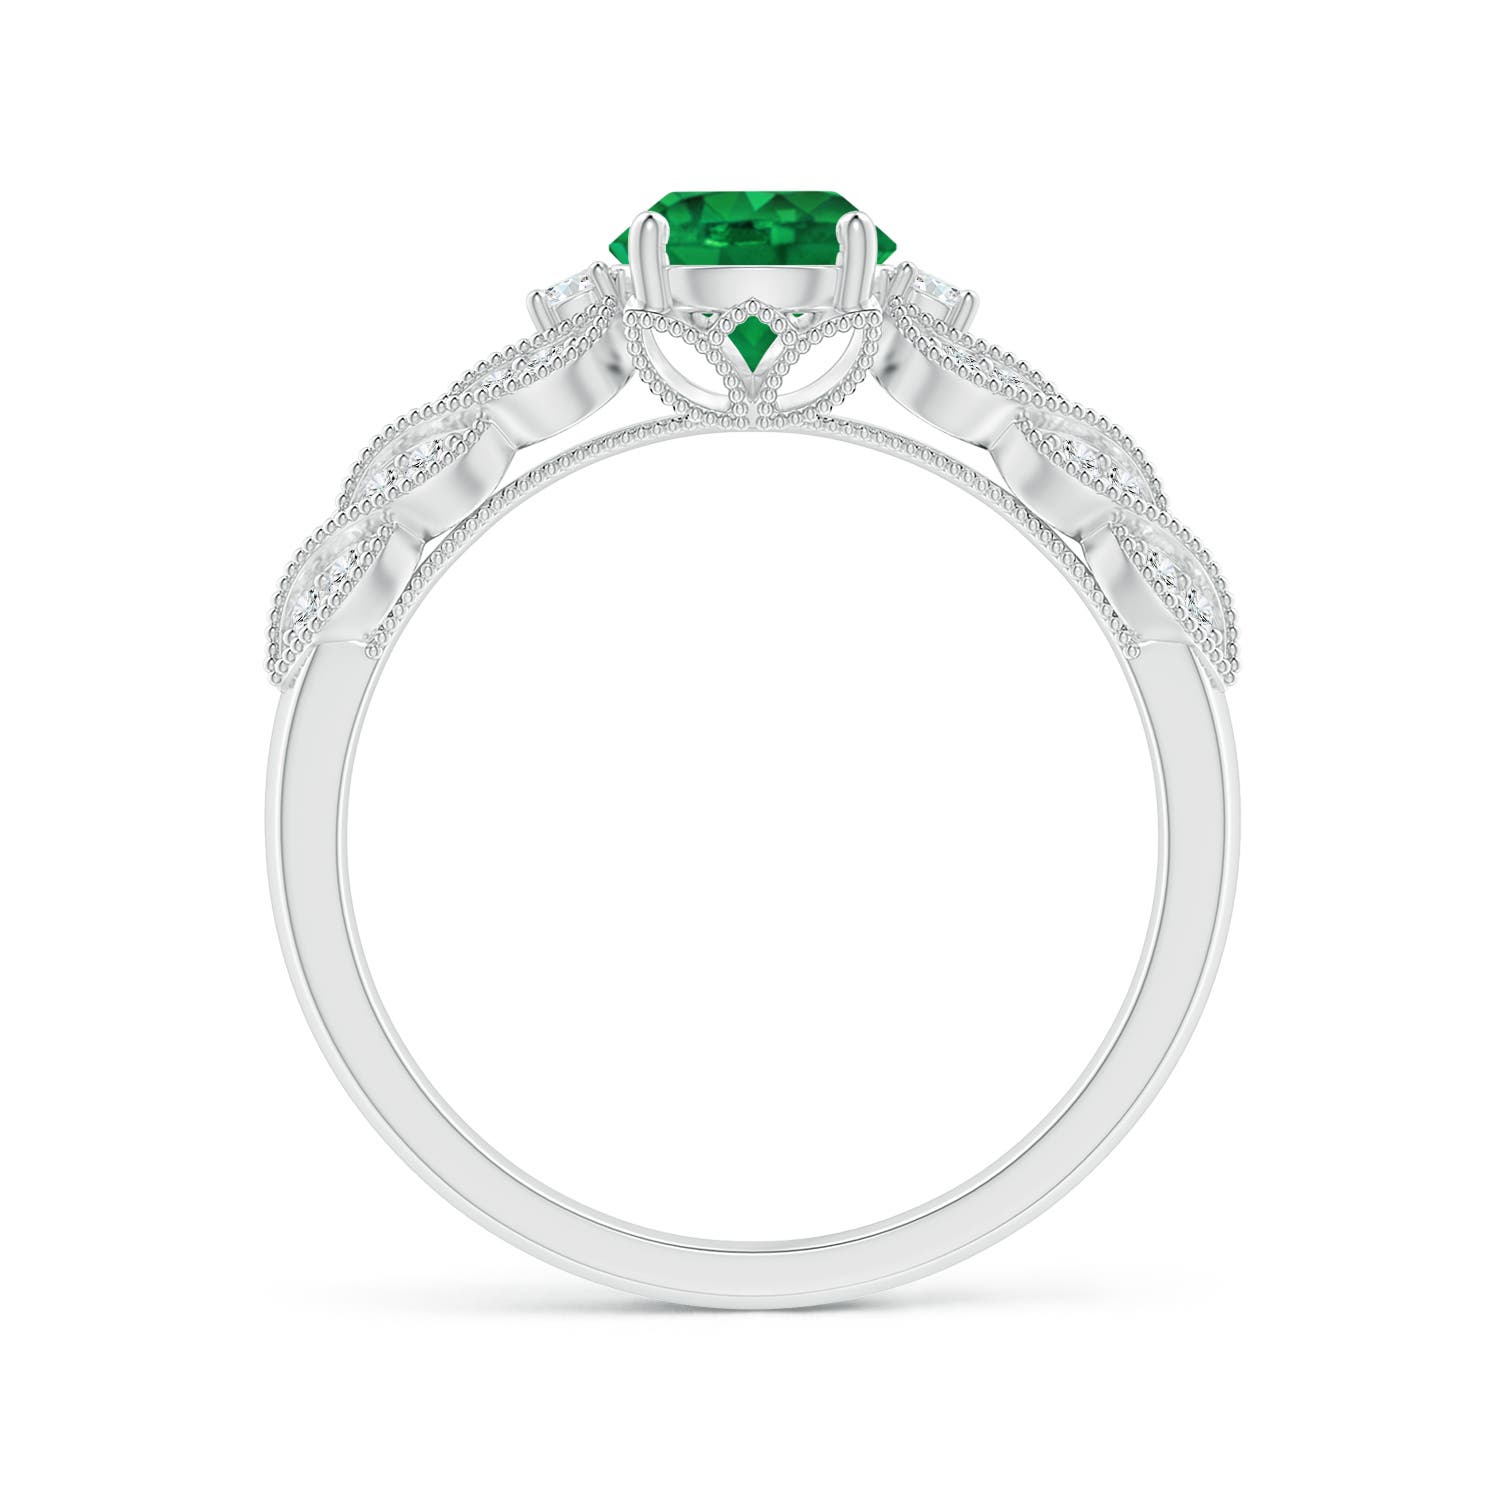 AAA - Emerald / 0.94 CT / 14 KT White Gold